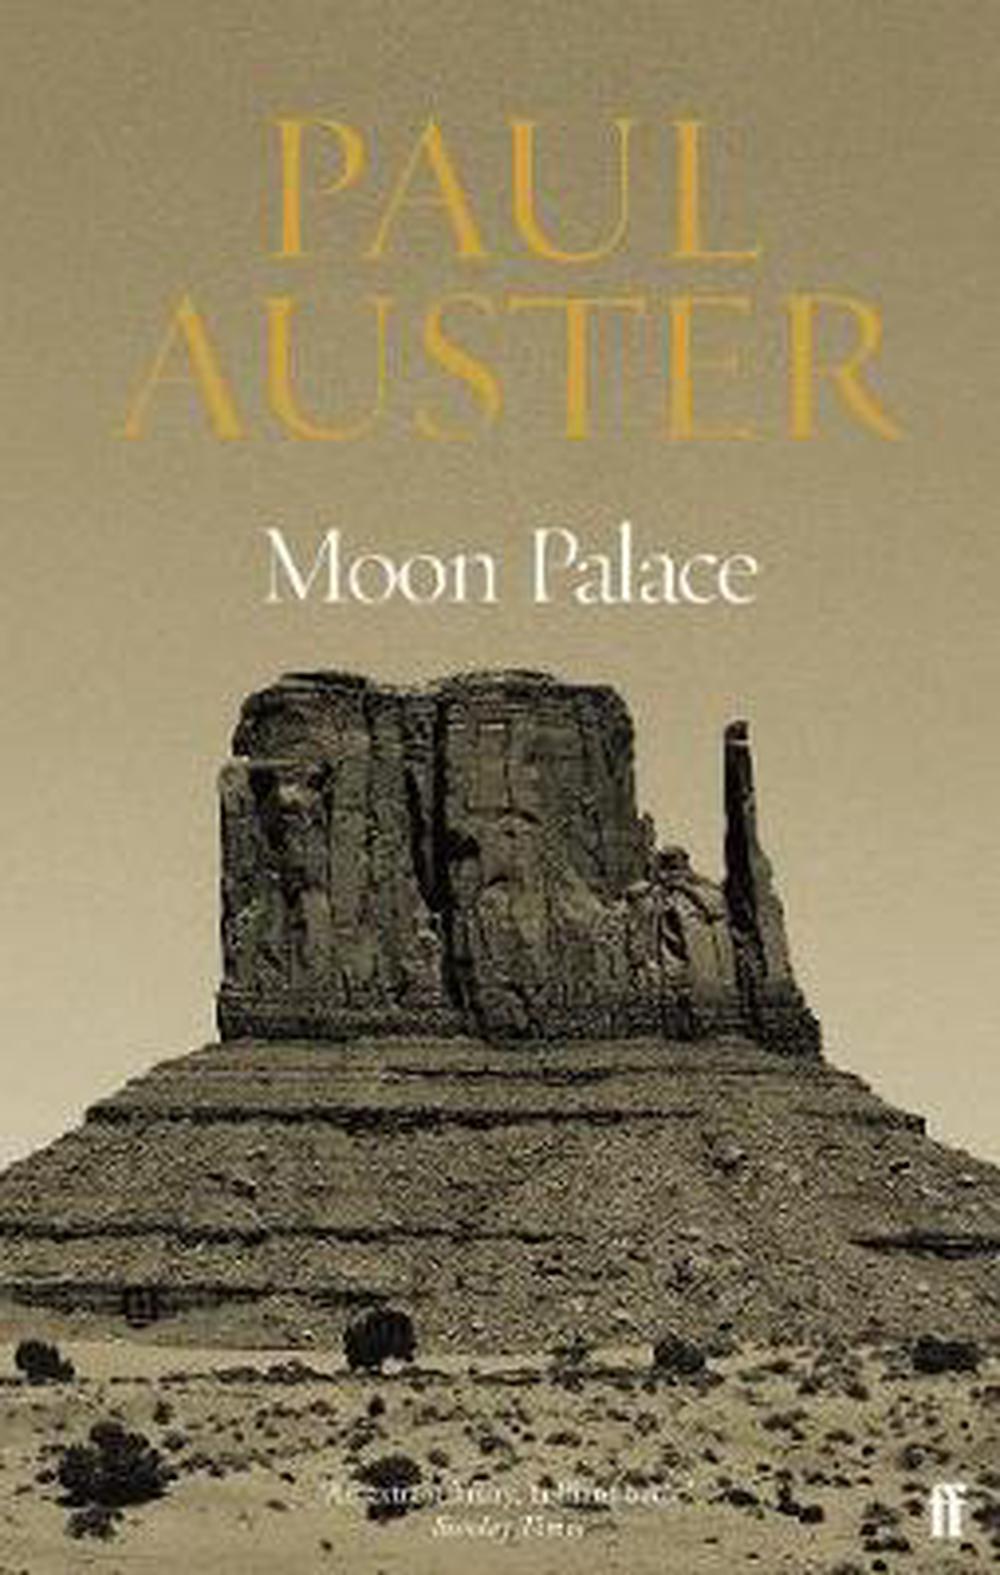 Moon Palace by Paul Auster, Paperback, 9780571142200 | Buy online at